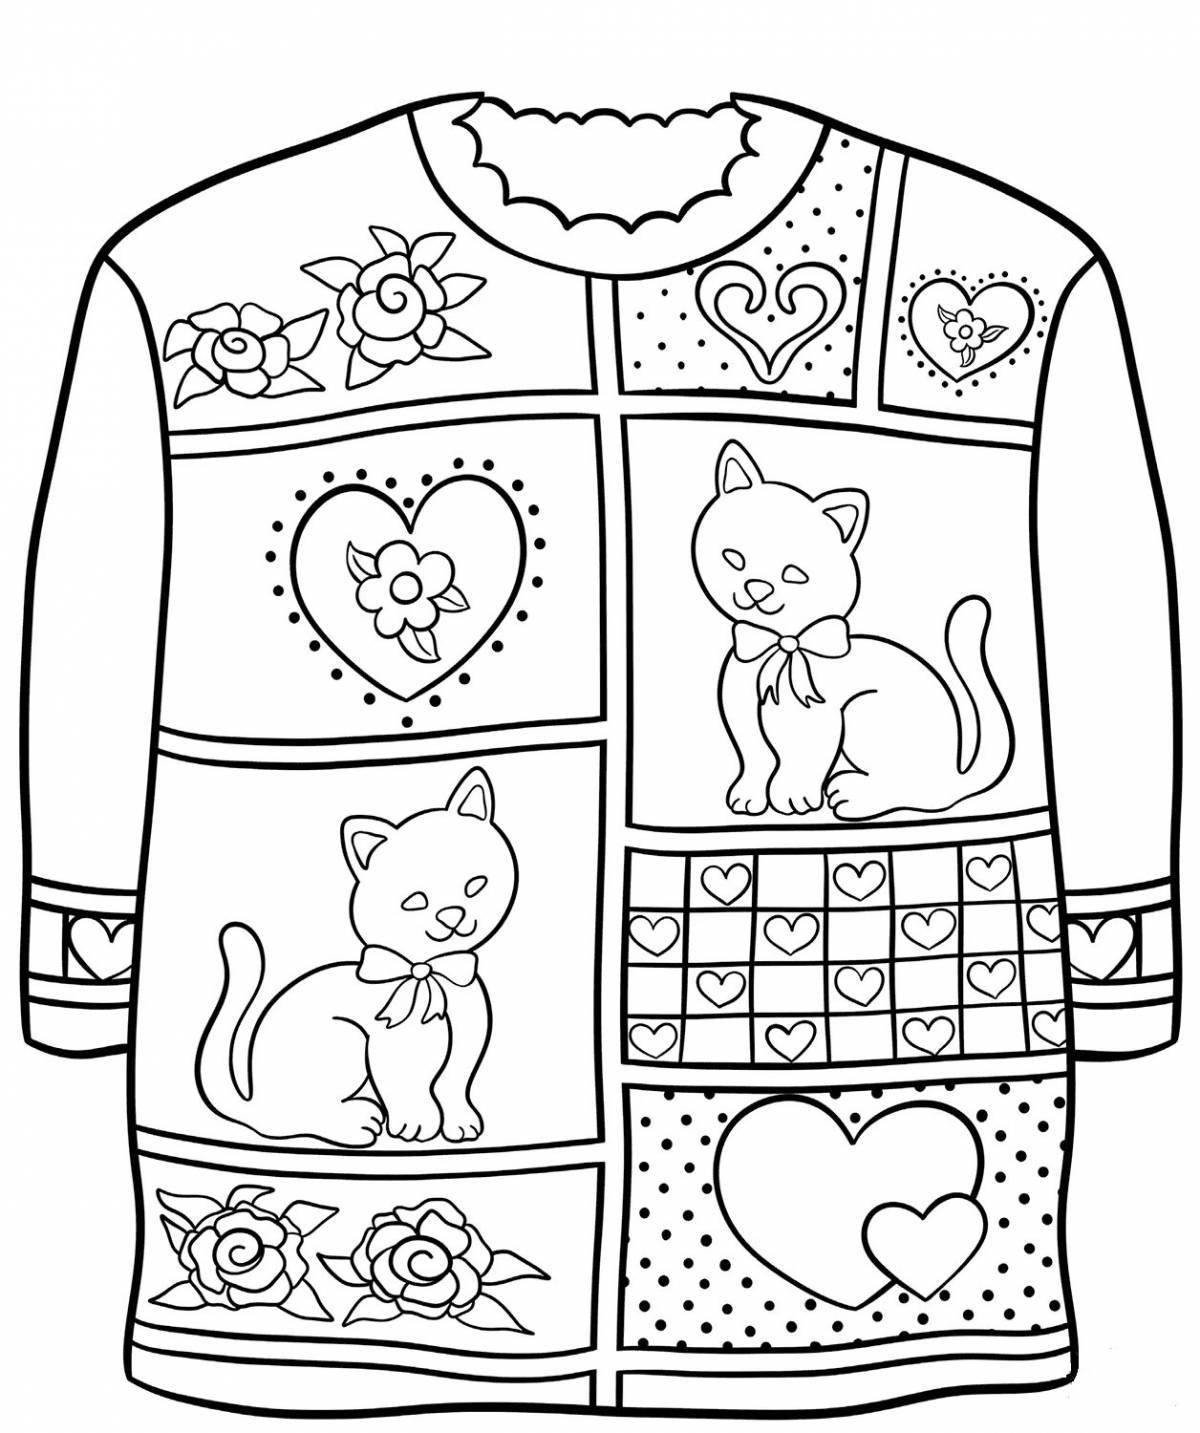 Adorable sweater coloring page for kids